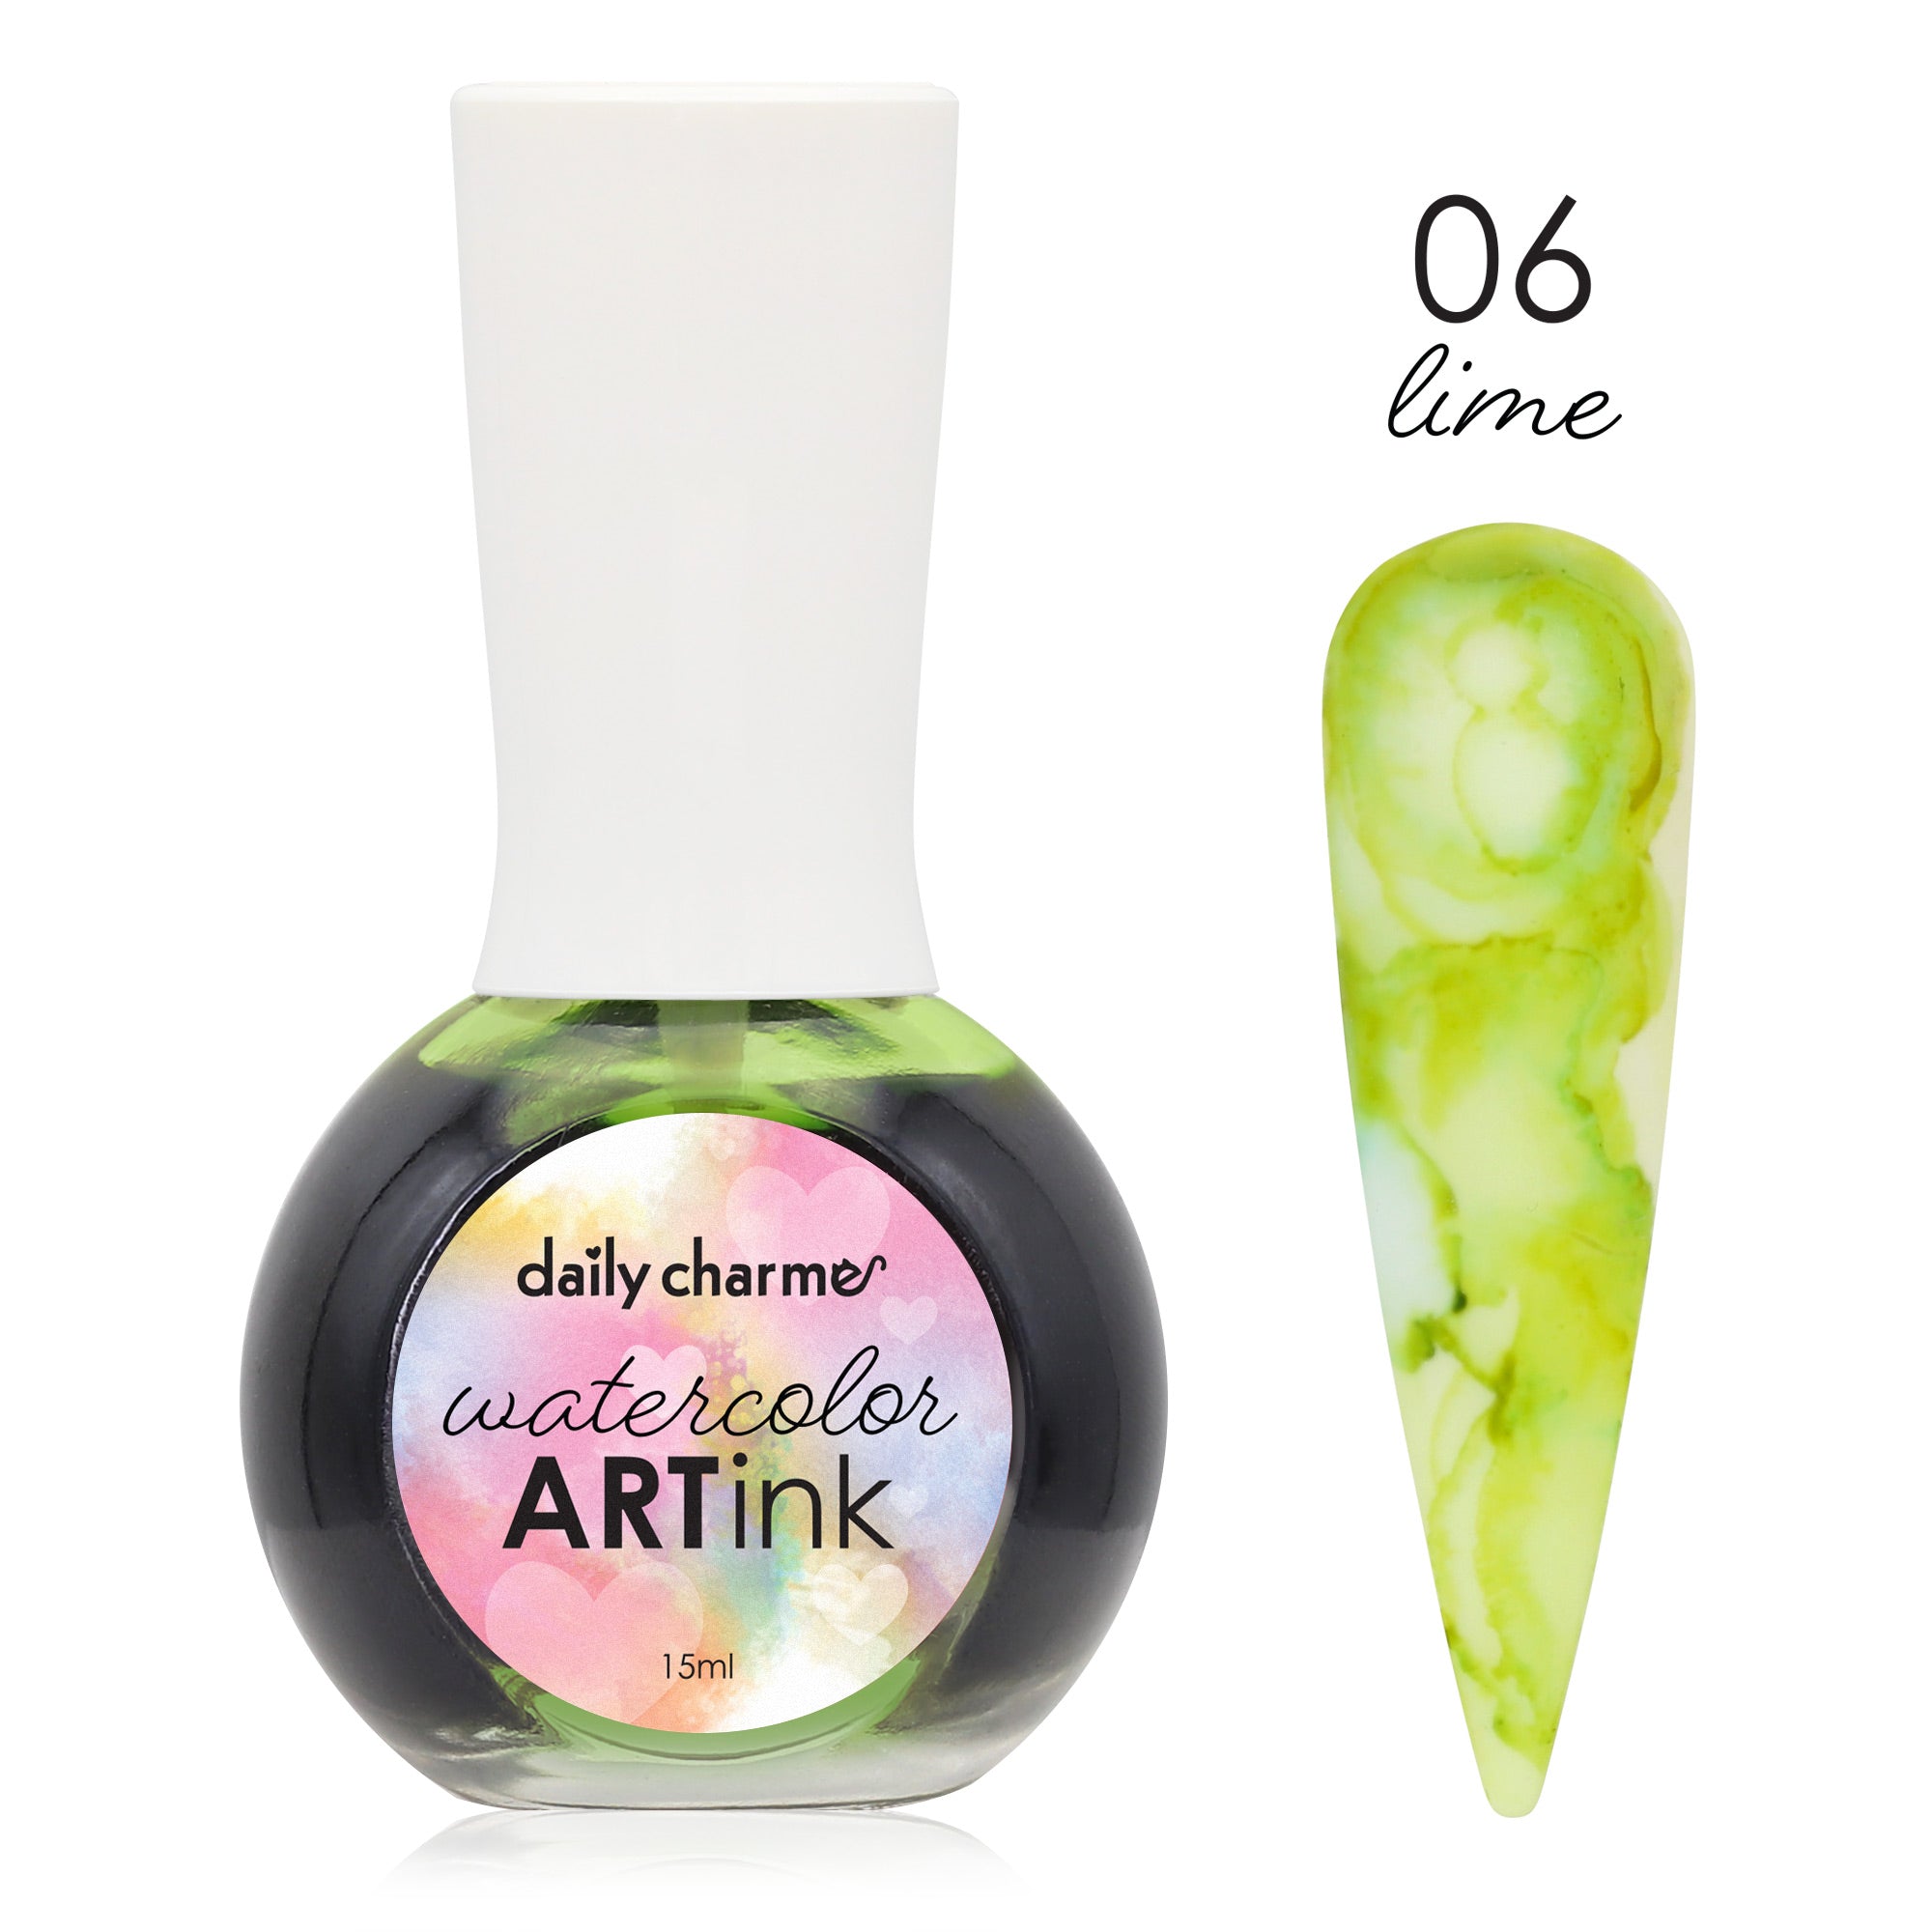 Daily Charme Watercolor Art Ink / 06 Lime Green Marble Nail Design